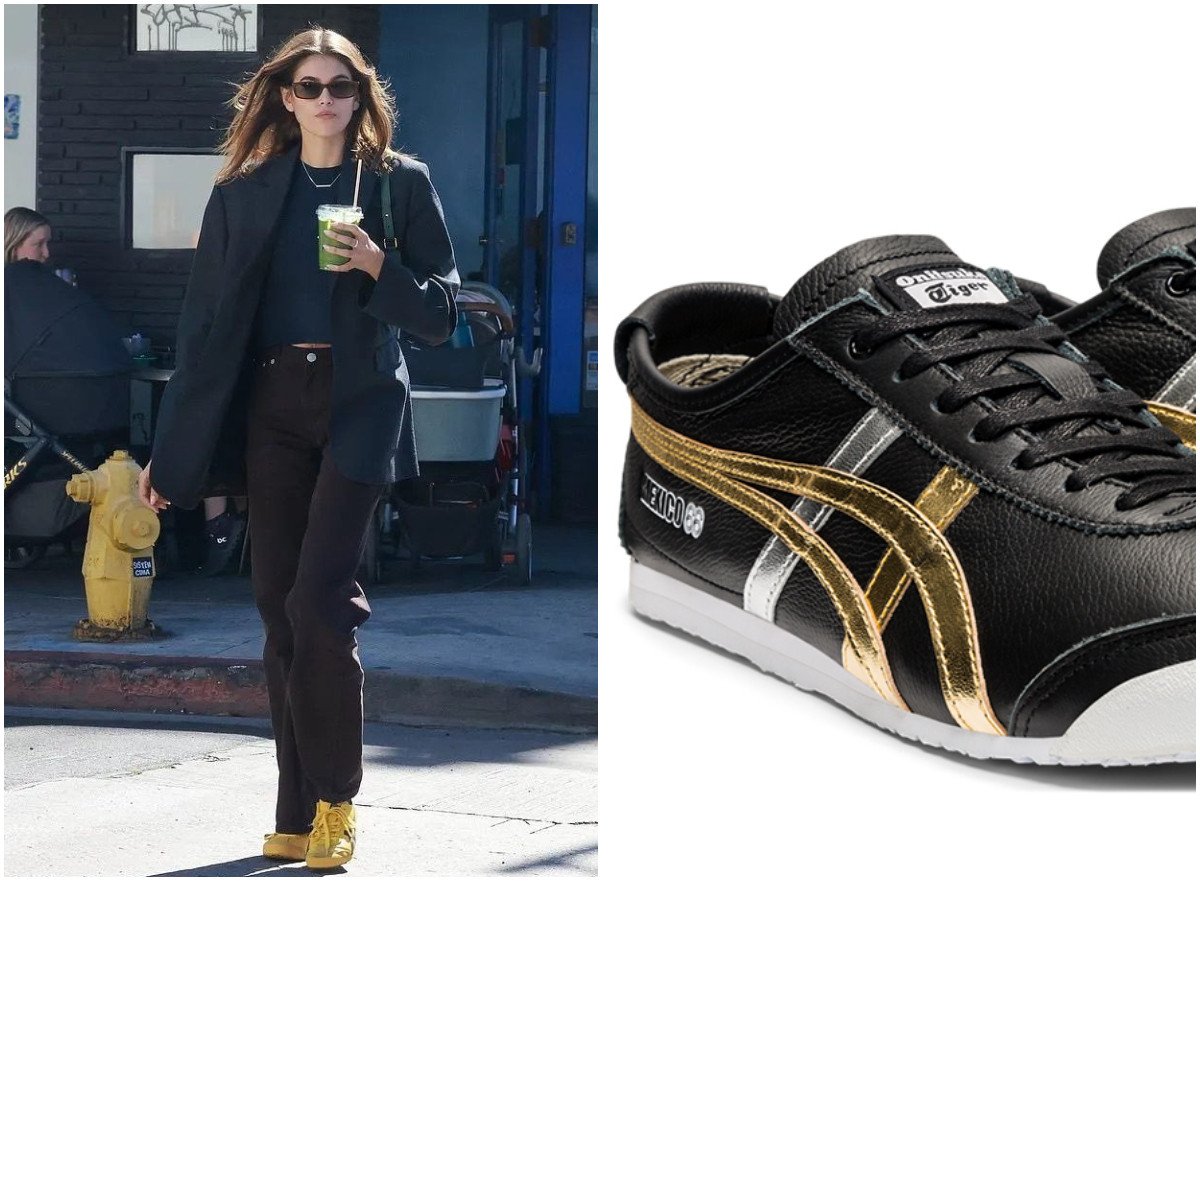 Onitsuka Tiger’s Mexico 66 sneaker is as hot as ever, and has recently been seen on celebrities including Kaia Gerber. Photos: Julesee by Julie Woolenberg/Pinterest, @onitsukatigersg/Instagram